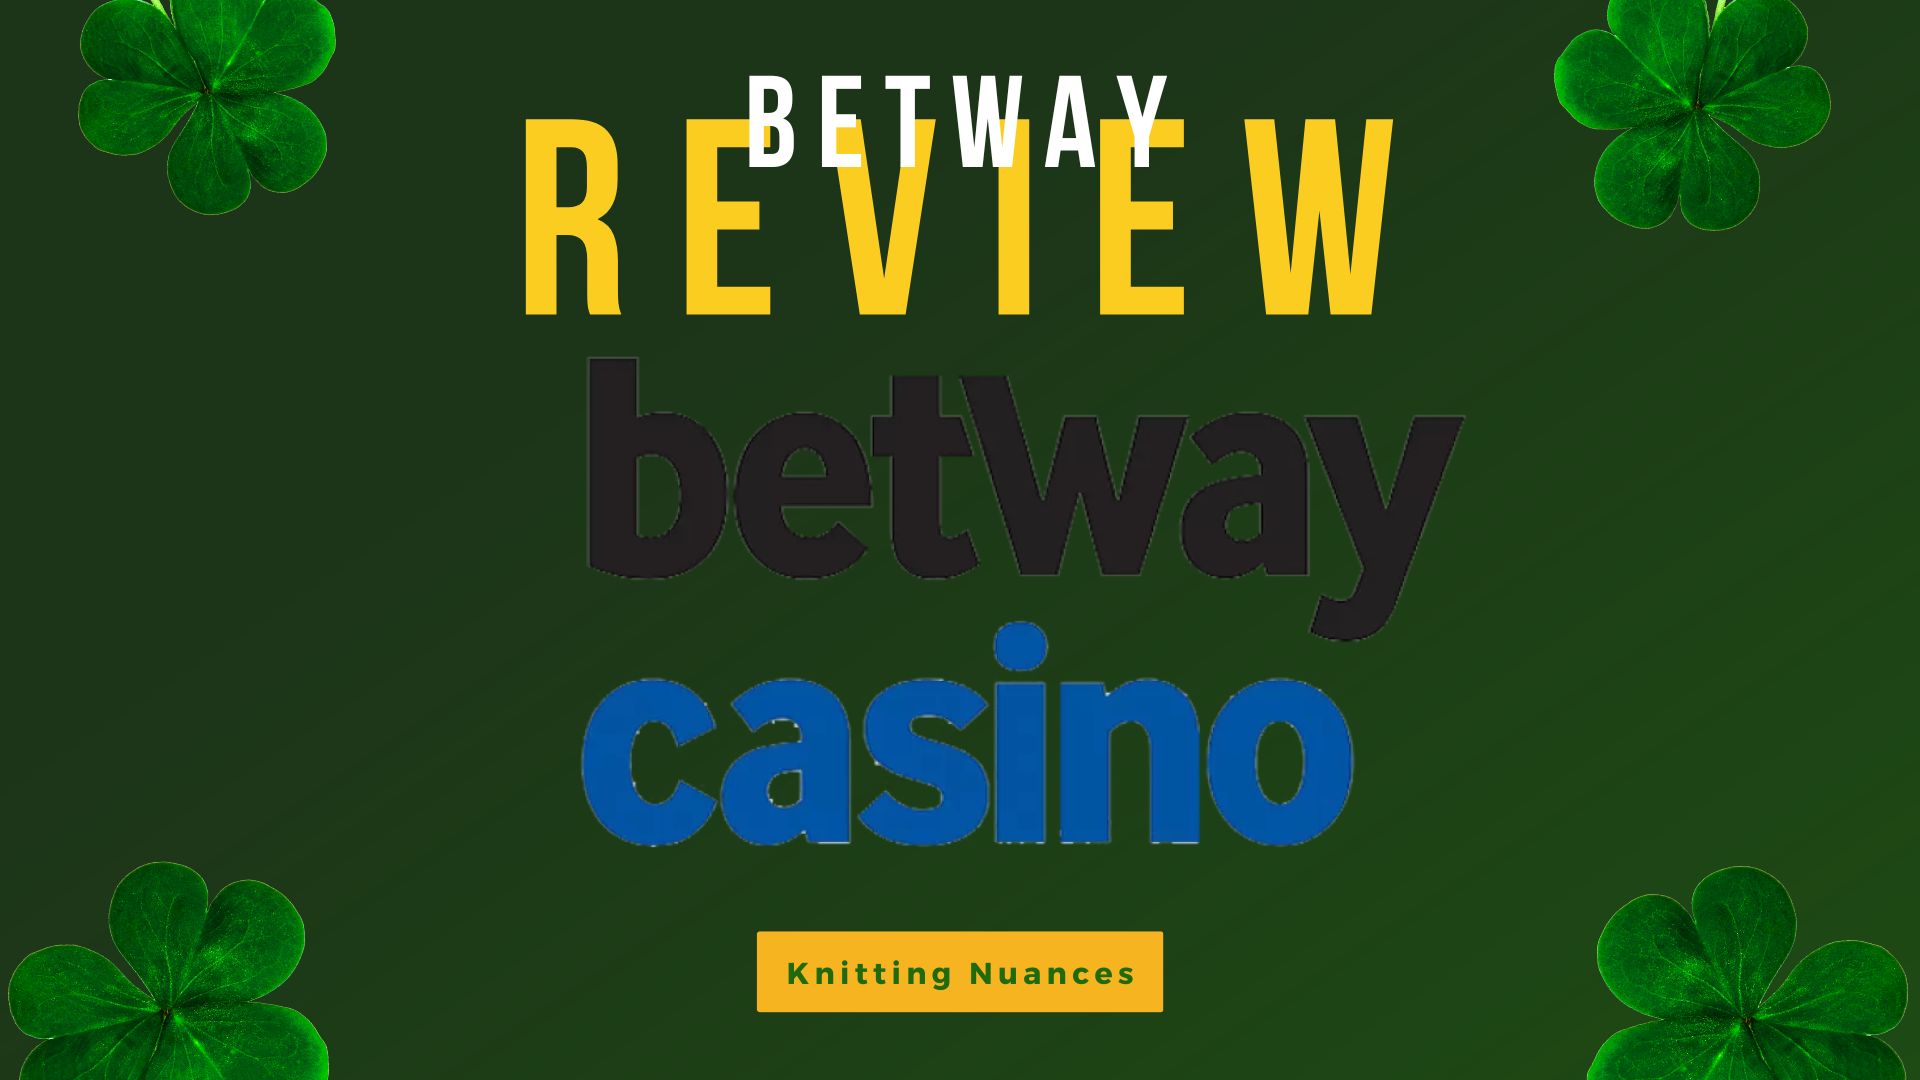 BetMGM Casino: Your Ultimate Destination for Online Casino Games: An Incredibly Easy Method That Works For All